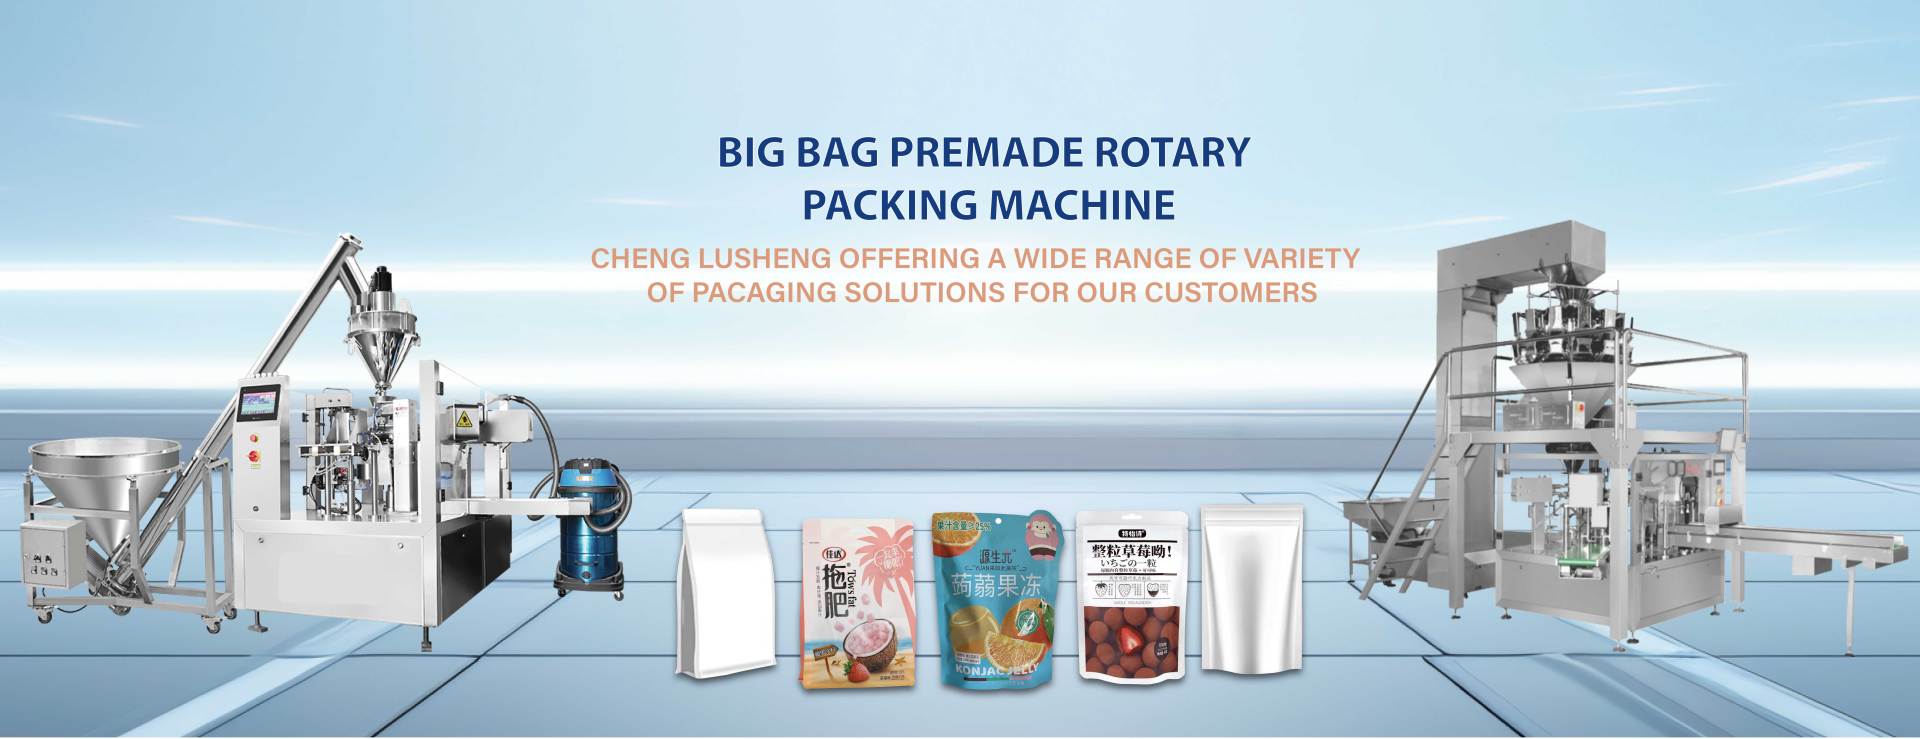 big bag premade potary packing machine,cheng lusheng orrering a wide range of variety of packaging solutions for our customers